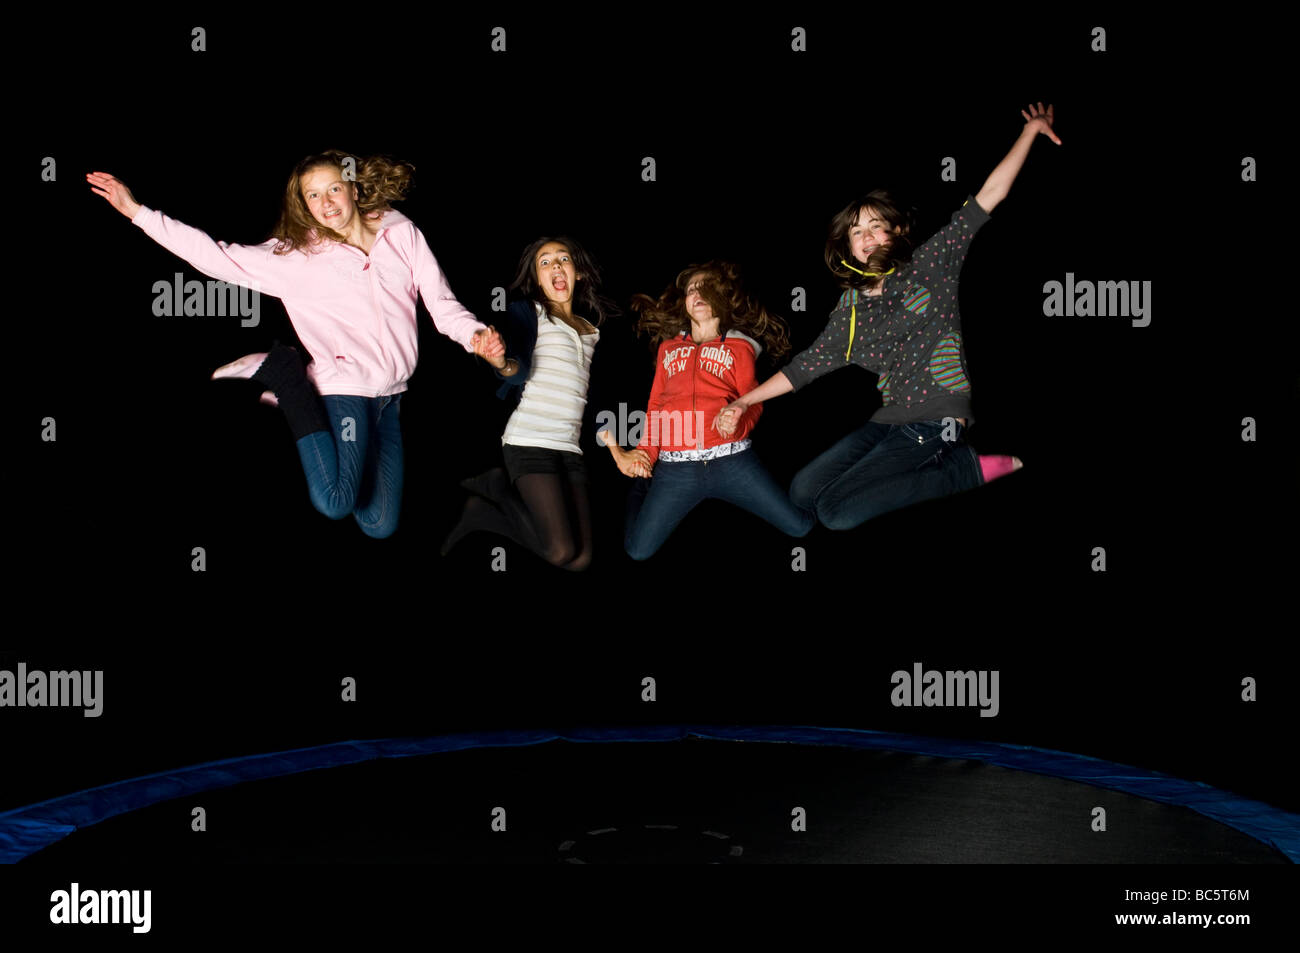 4 young early teens girl friends jumping on a trampoline at night on a birthday 'sleepover'. Stock Photo